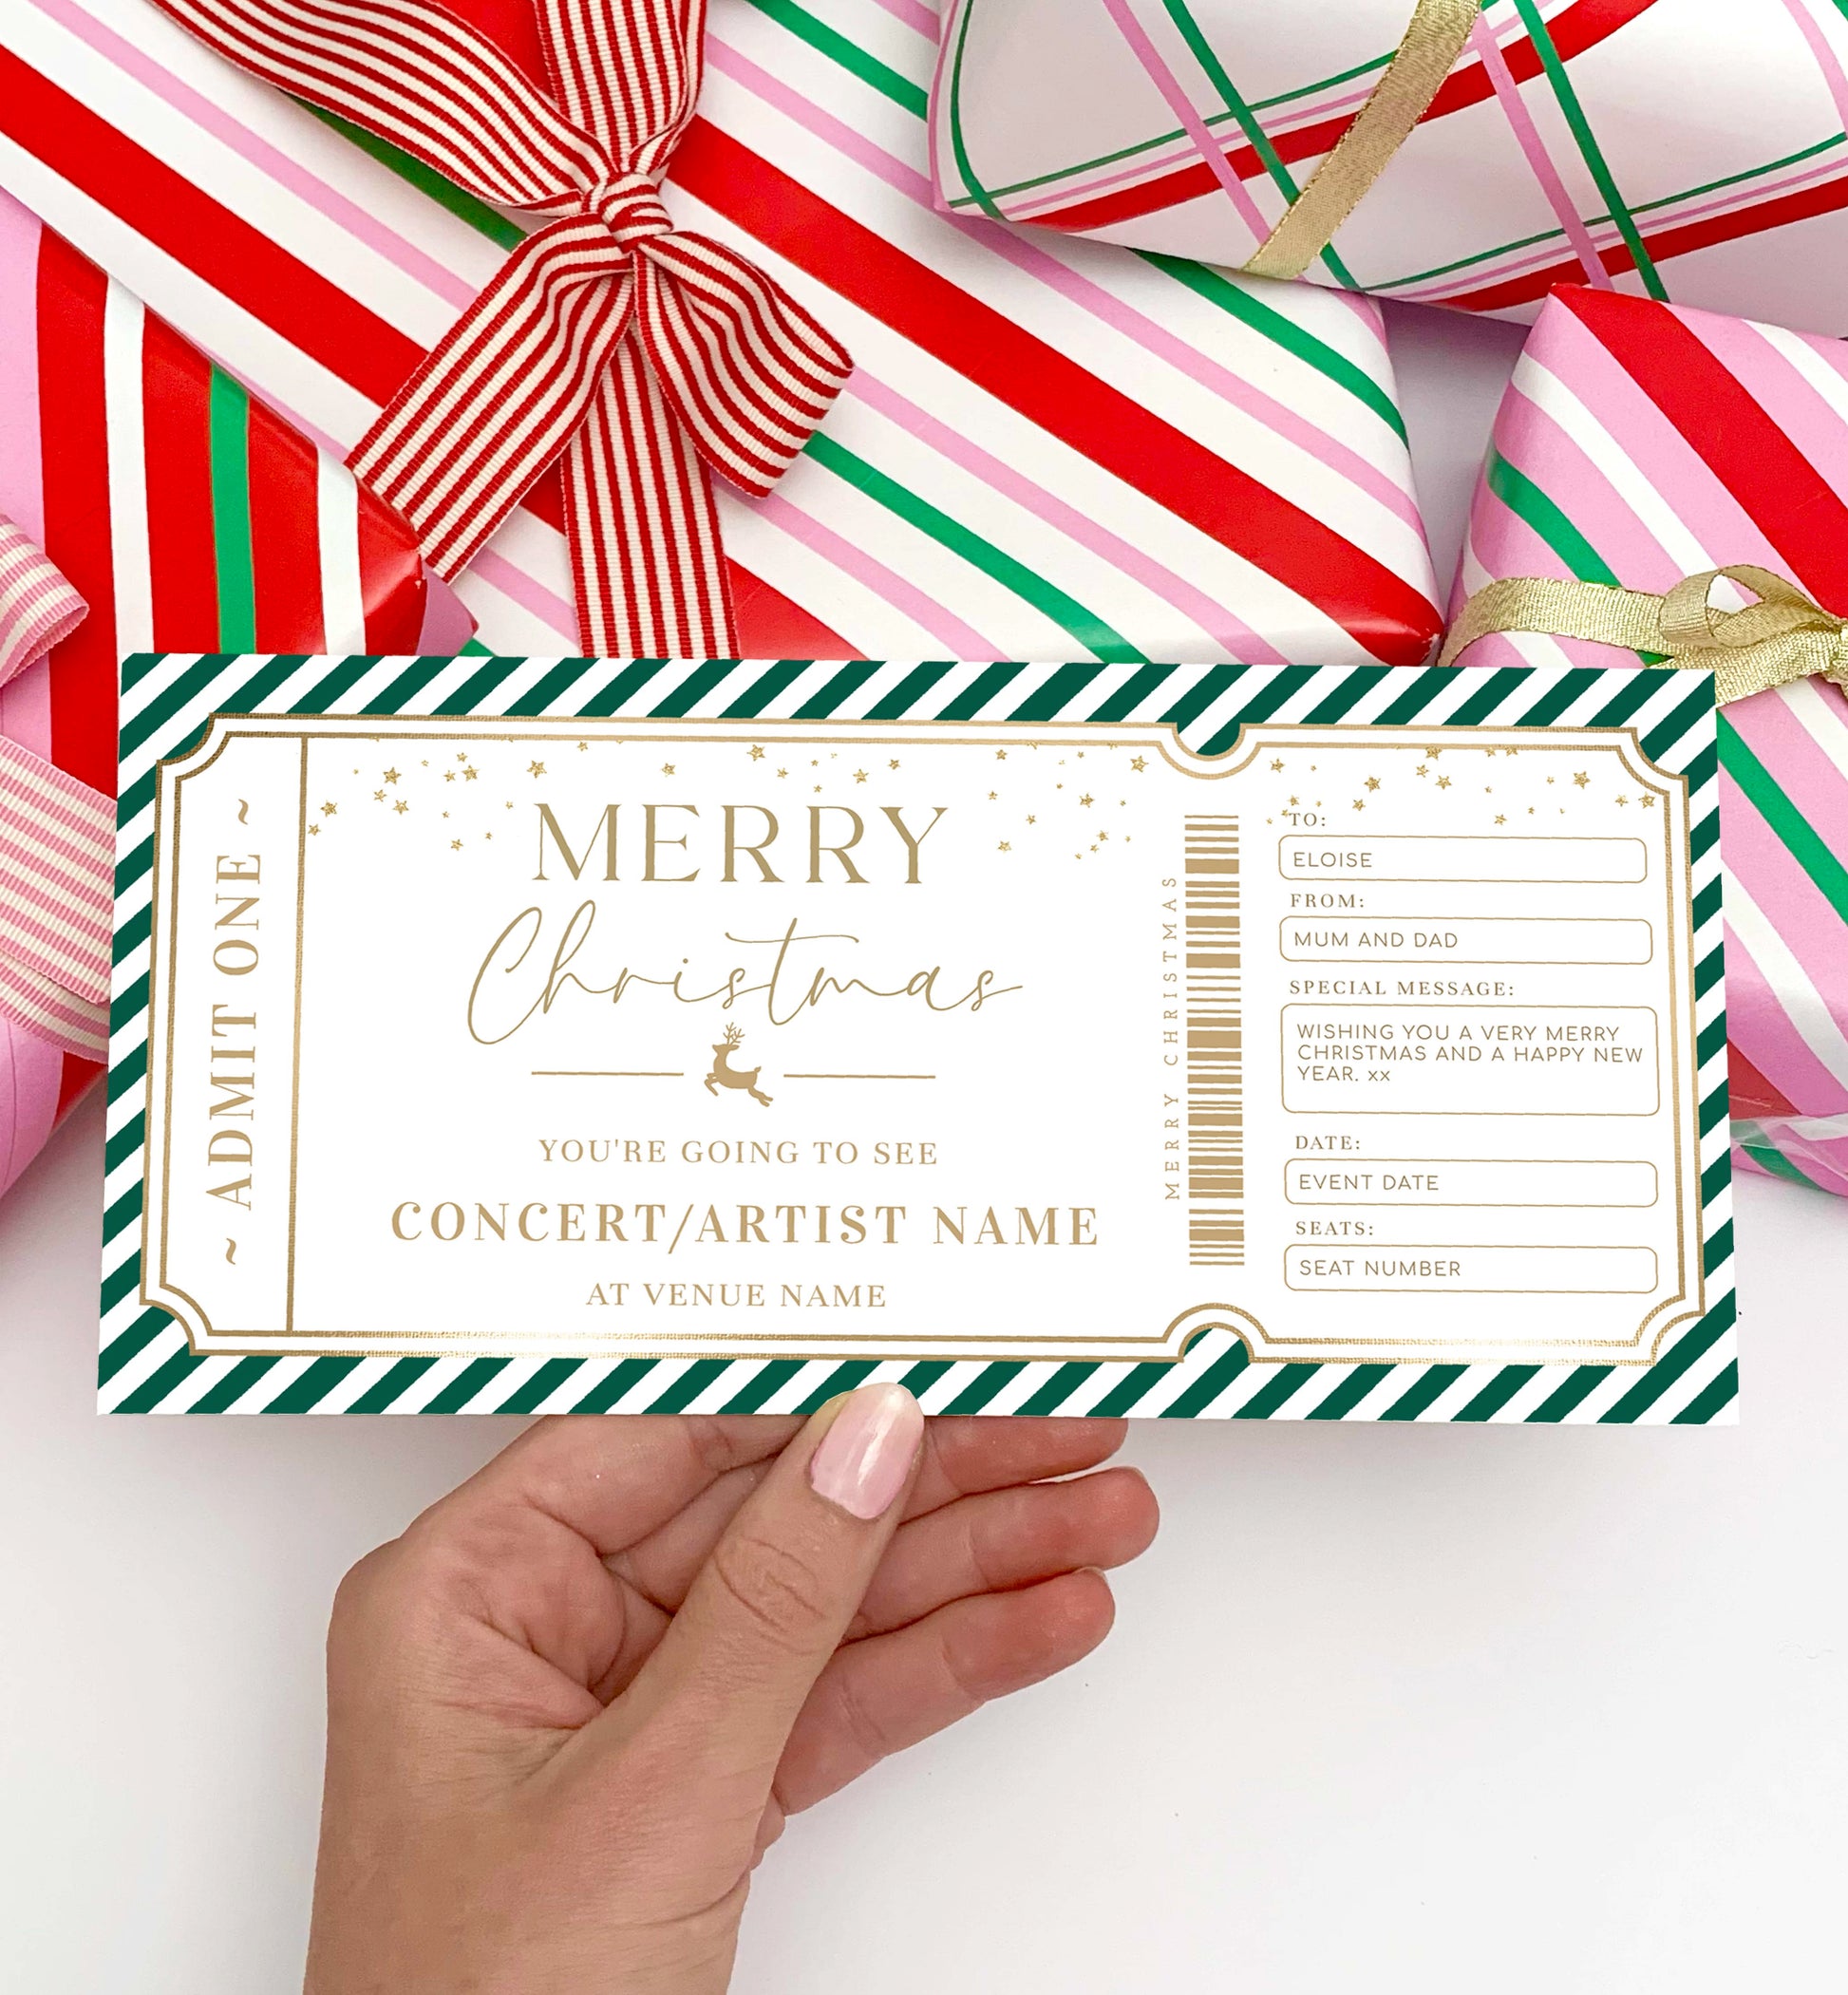 Christmas Concert Ticket Gift Voucher Template, Fully Custom Printable Gift Certificate, Music Show Ticket Christmas Present, Coupon, Surprise Show, Performance, Artist, Printable Gift Certificate